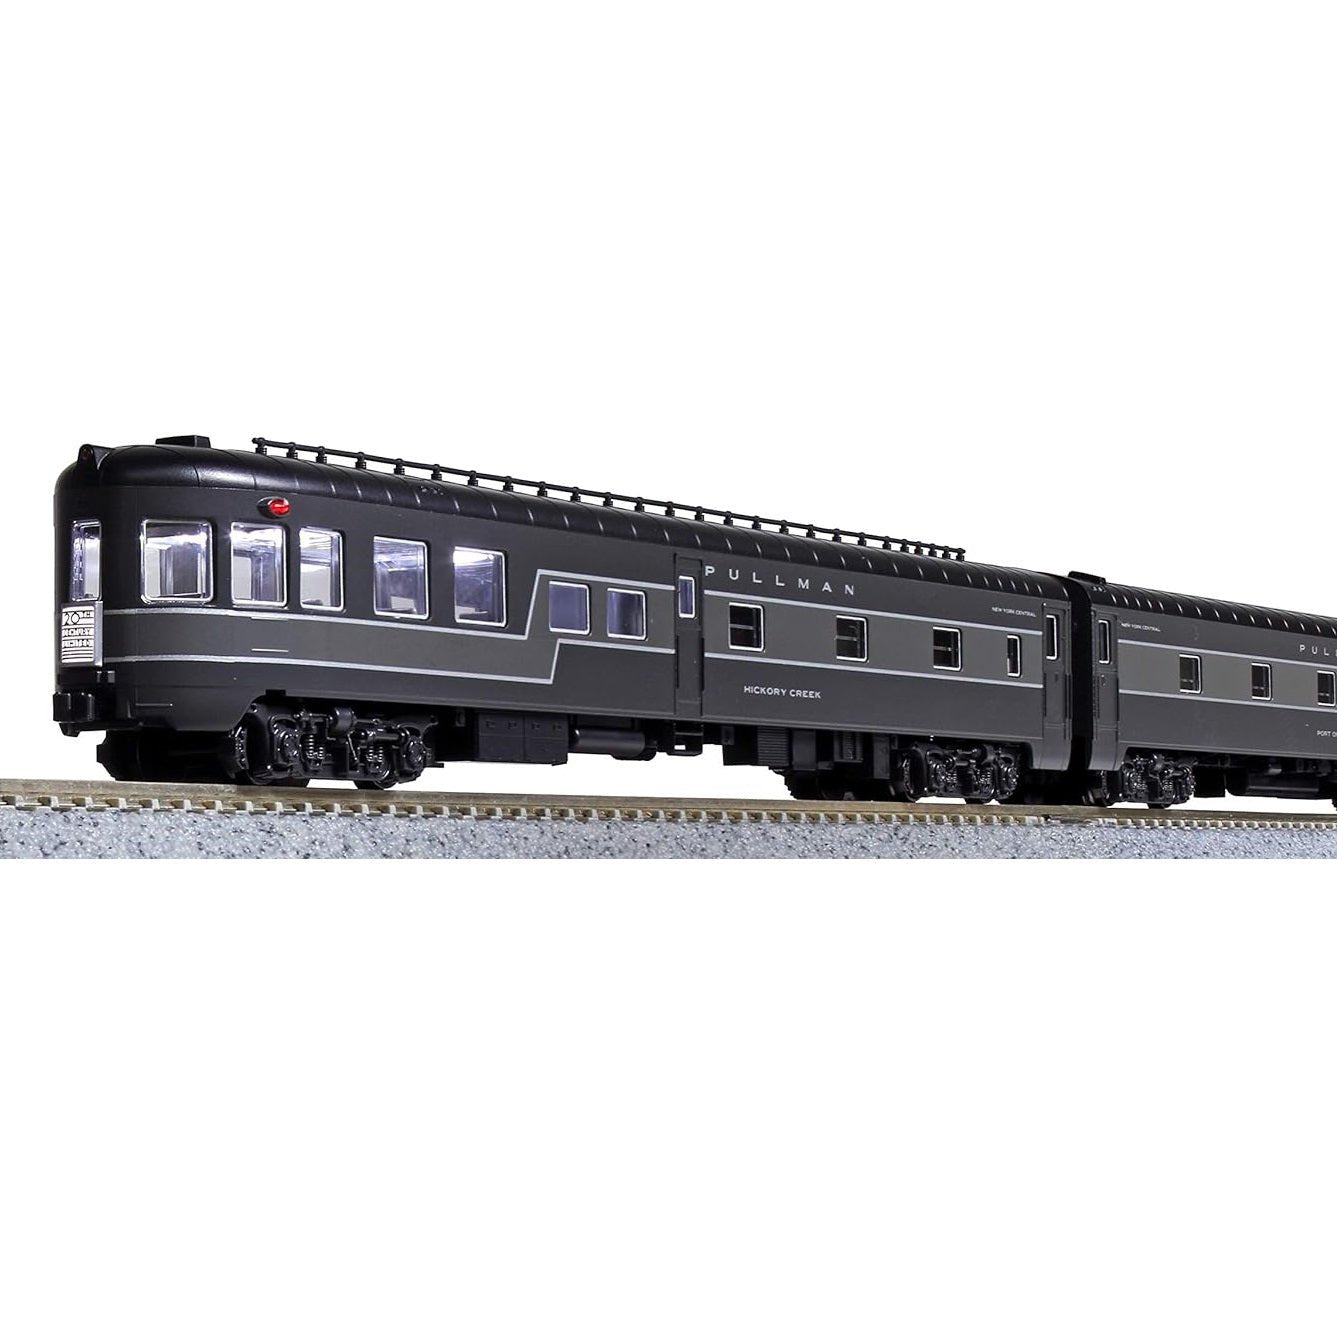 Kato USA New York Central 20th Century Limited 9 - Car Set, N Scale